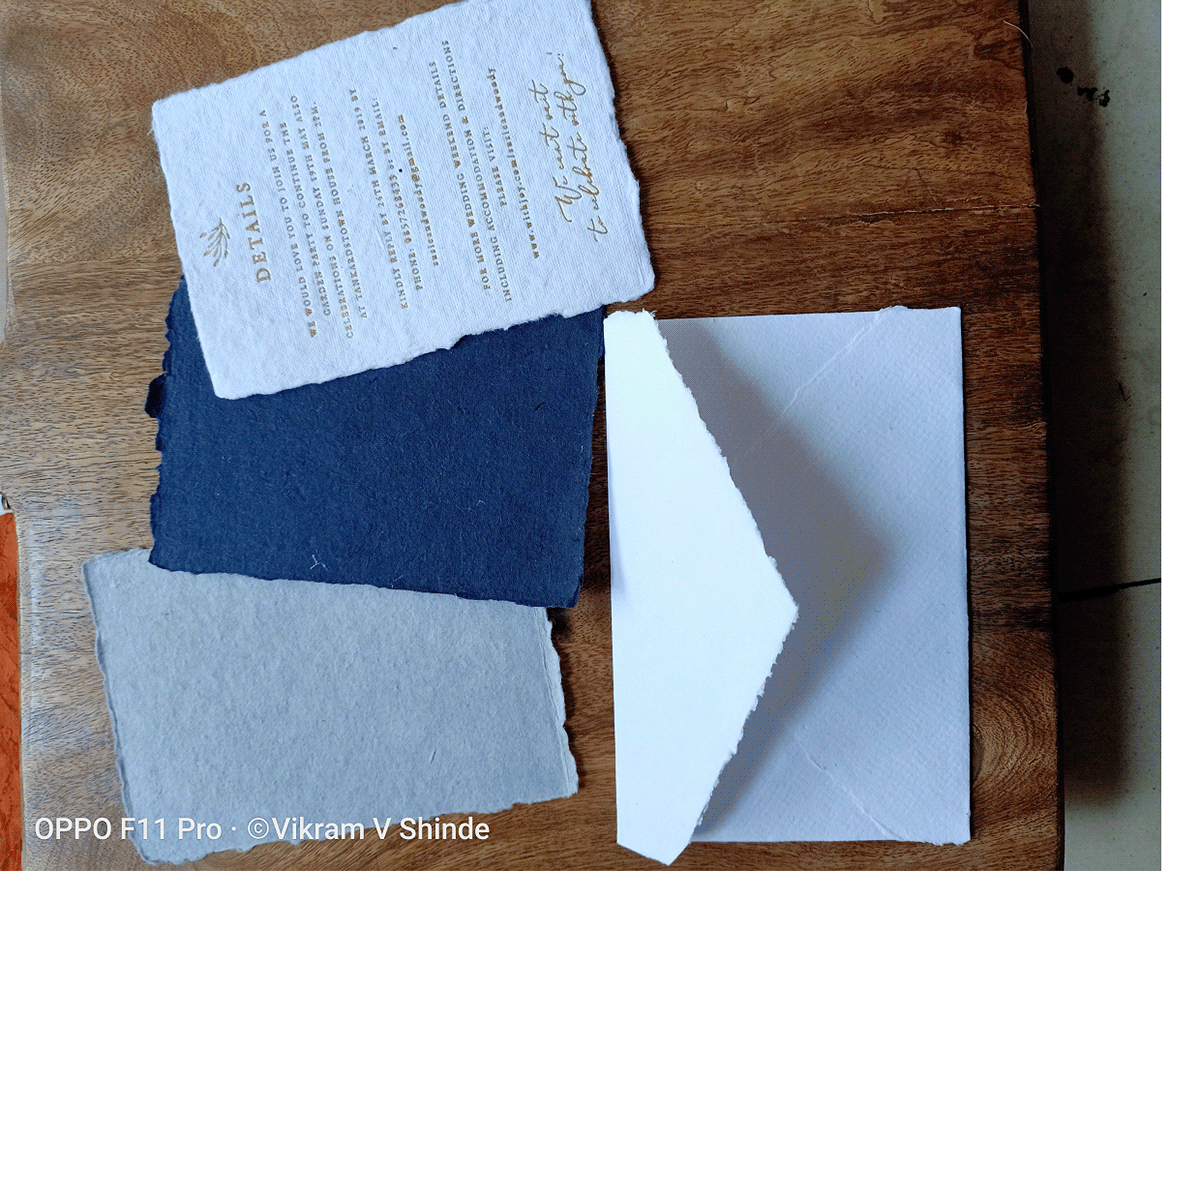 deckle edged cards deckle edged invitations deckle edged invites deckle edged paper deckle edged stationer deckle edged stationery